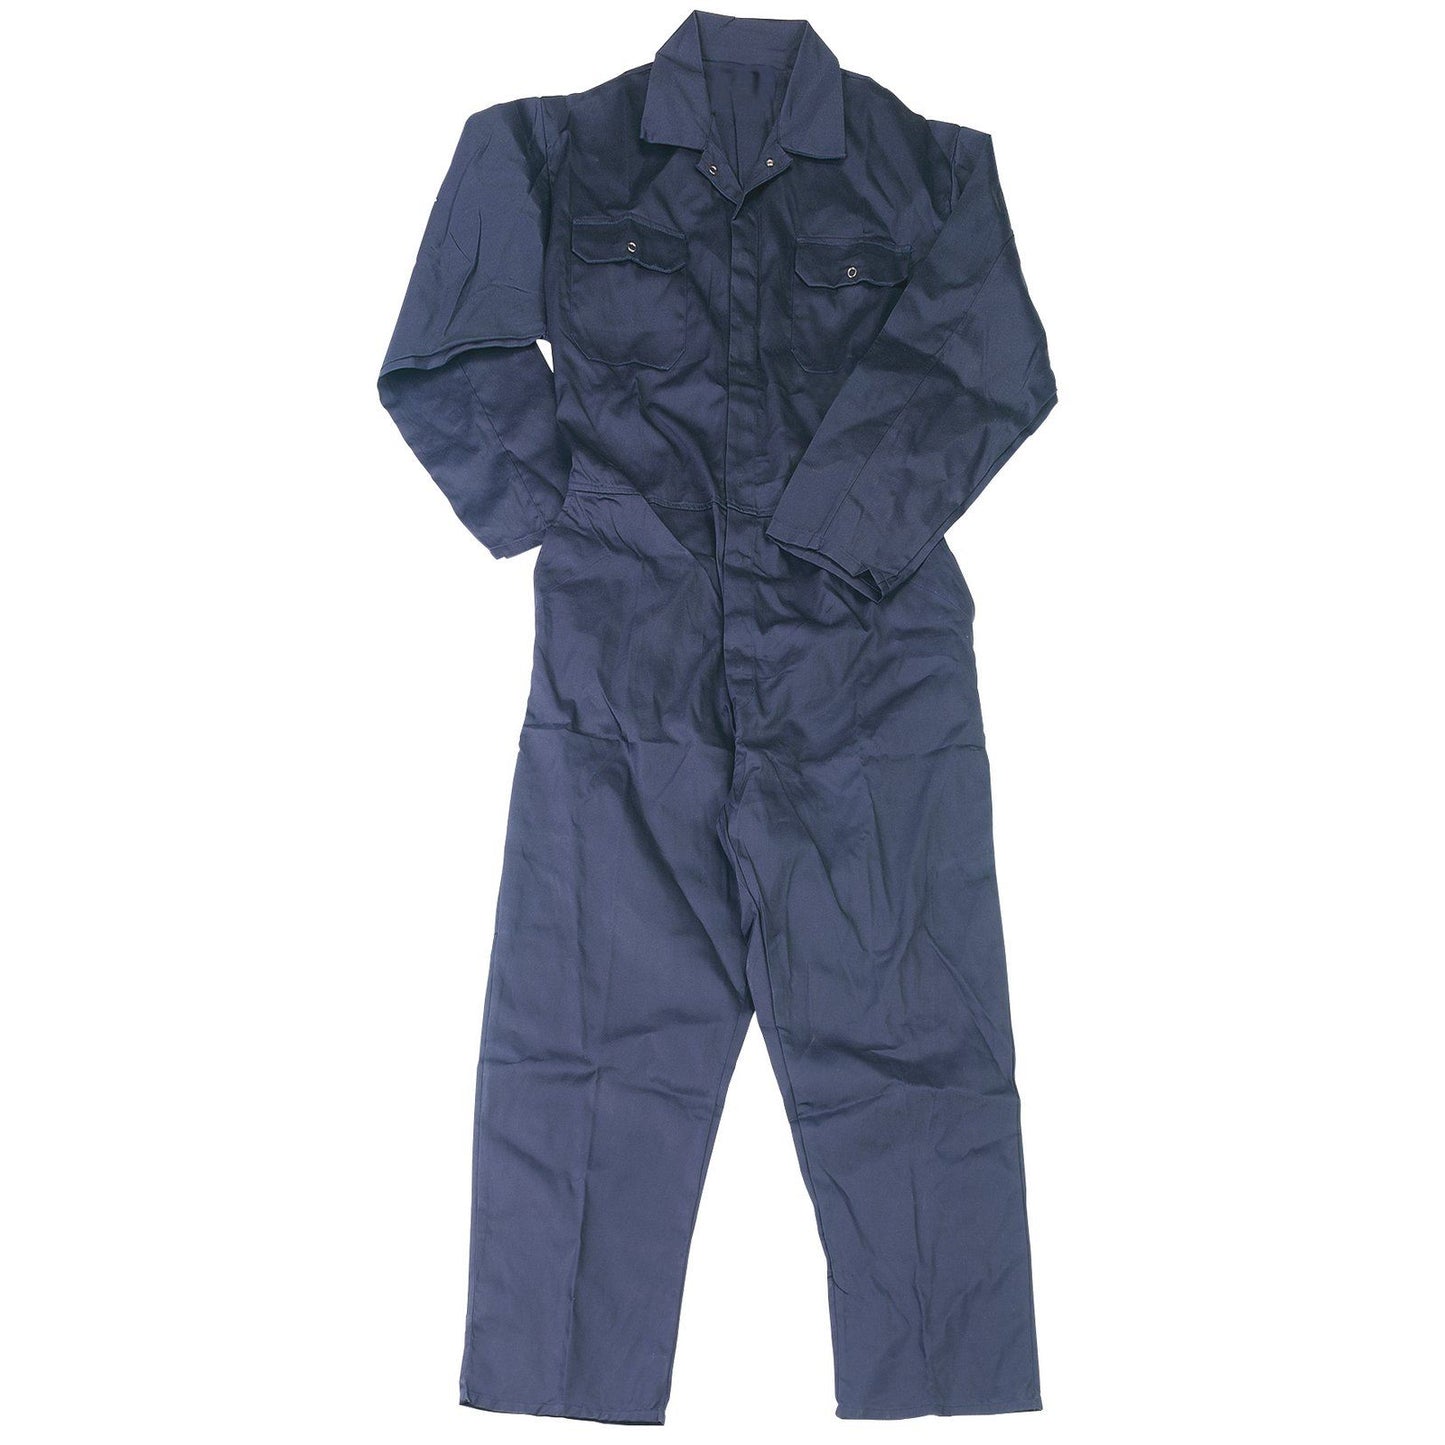 Draper Safety Work Polyester/Cotton Elasticated Back Protection Boiler Suit - 37814